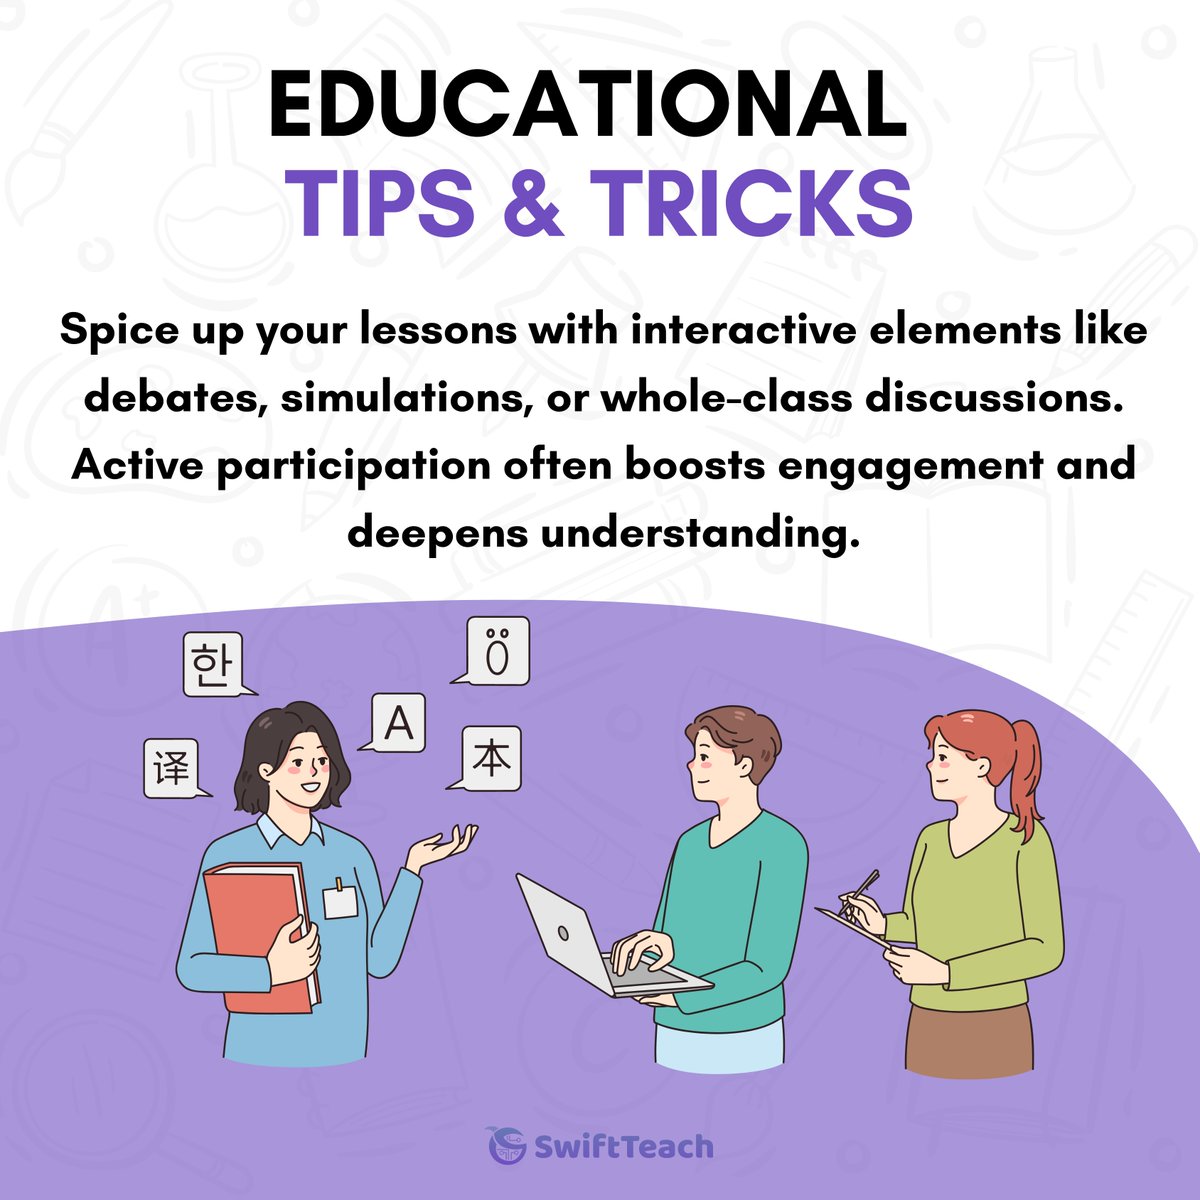 Active participation in lessons will often deepen your students’ understanding. If you feel like you want to make your lessons a little more engaging, try something like a full-classroom debate to get everybody engaged 📚 #teachertips #teacherhacks #teaching #swiftteach